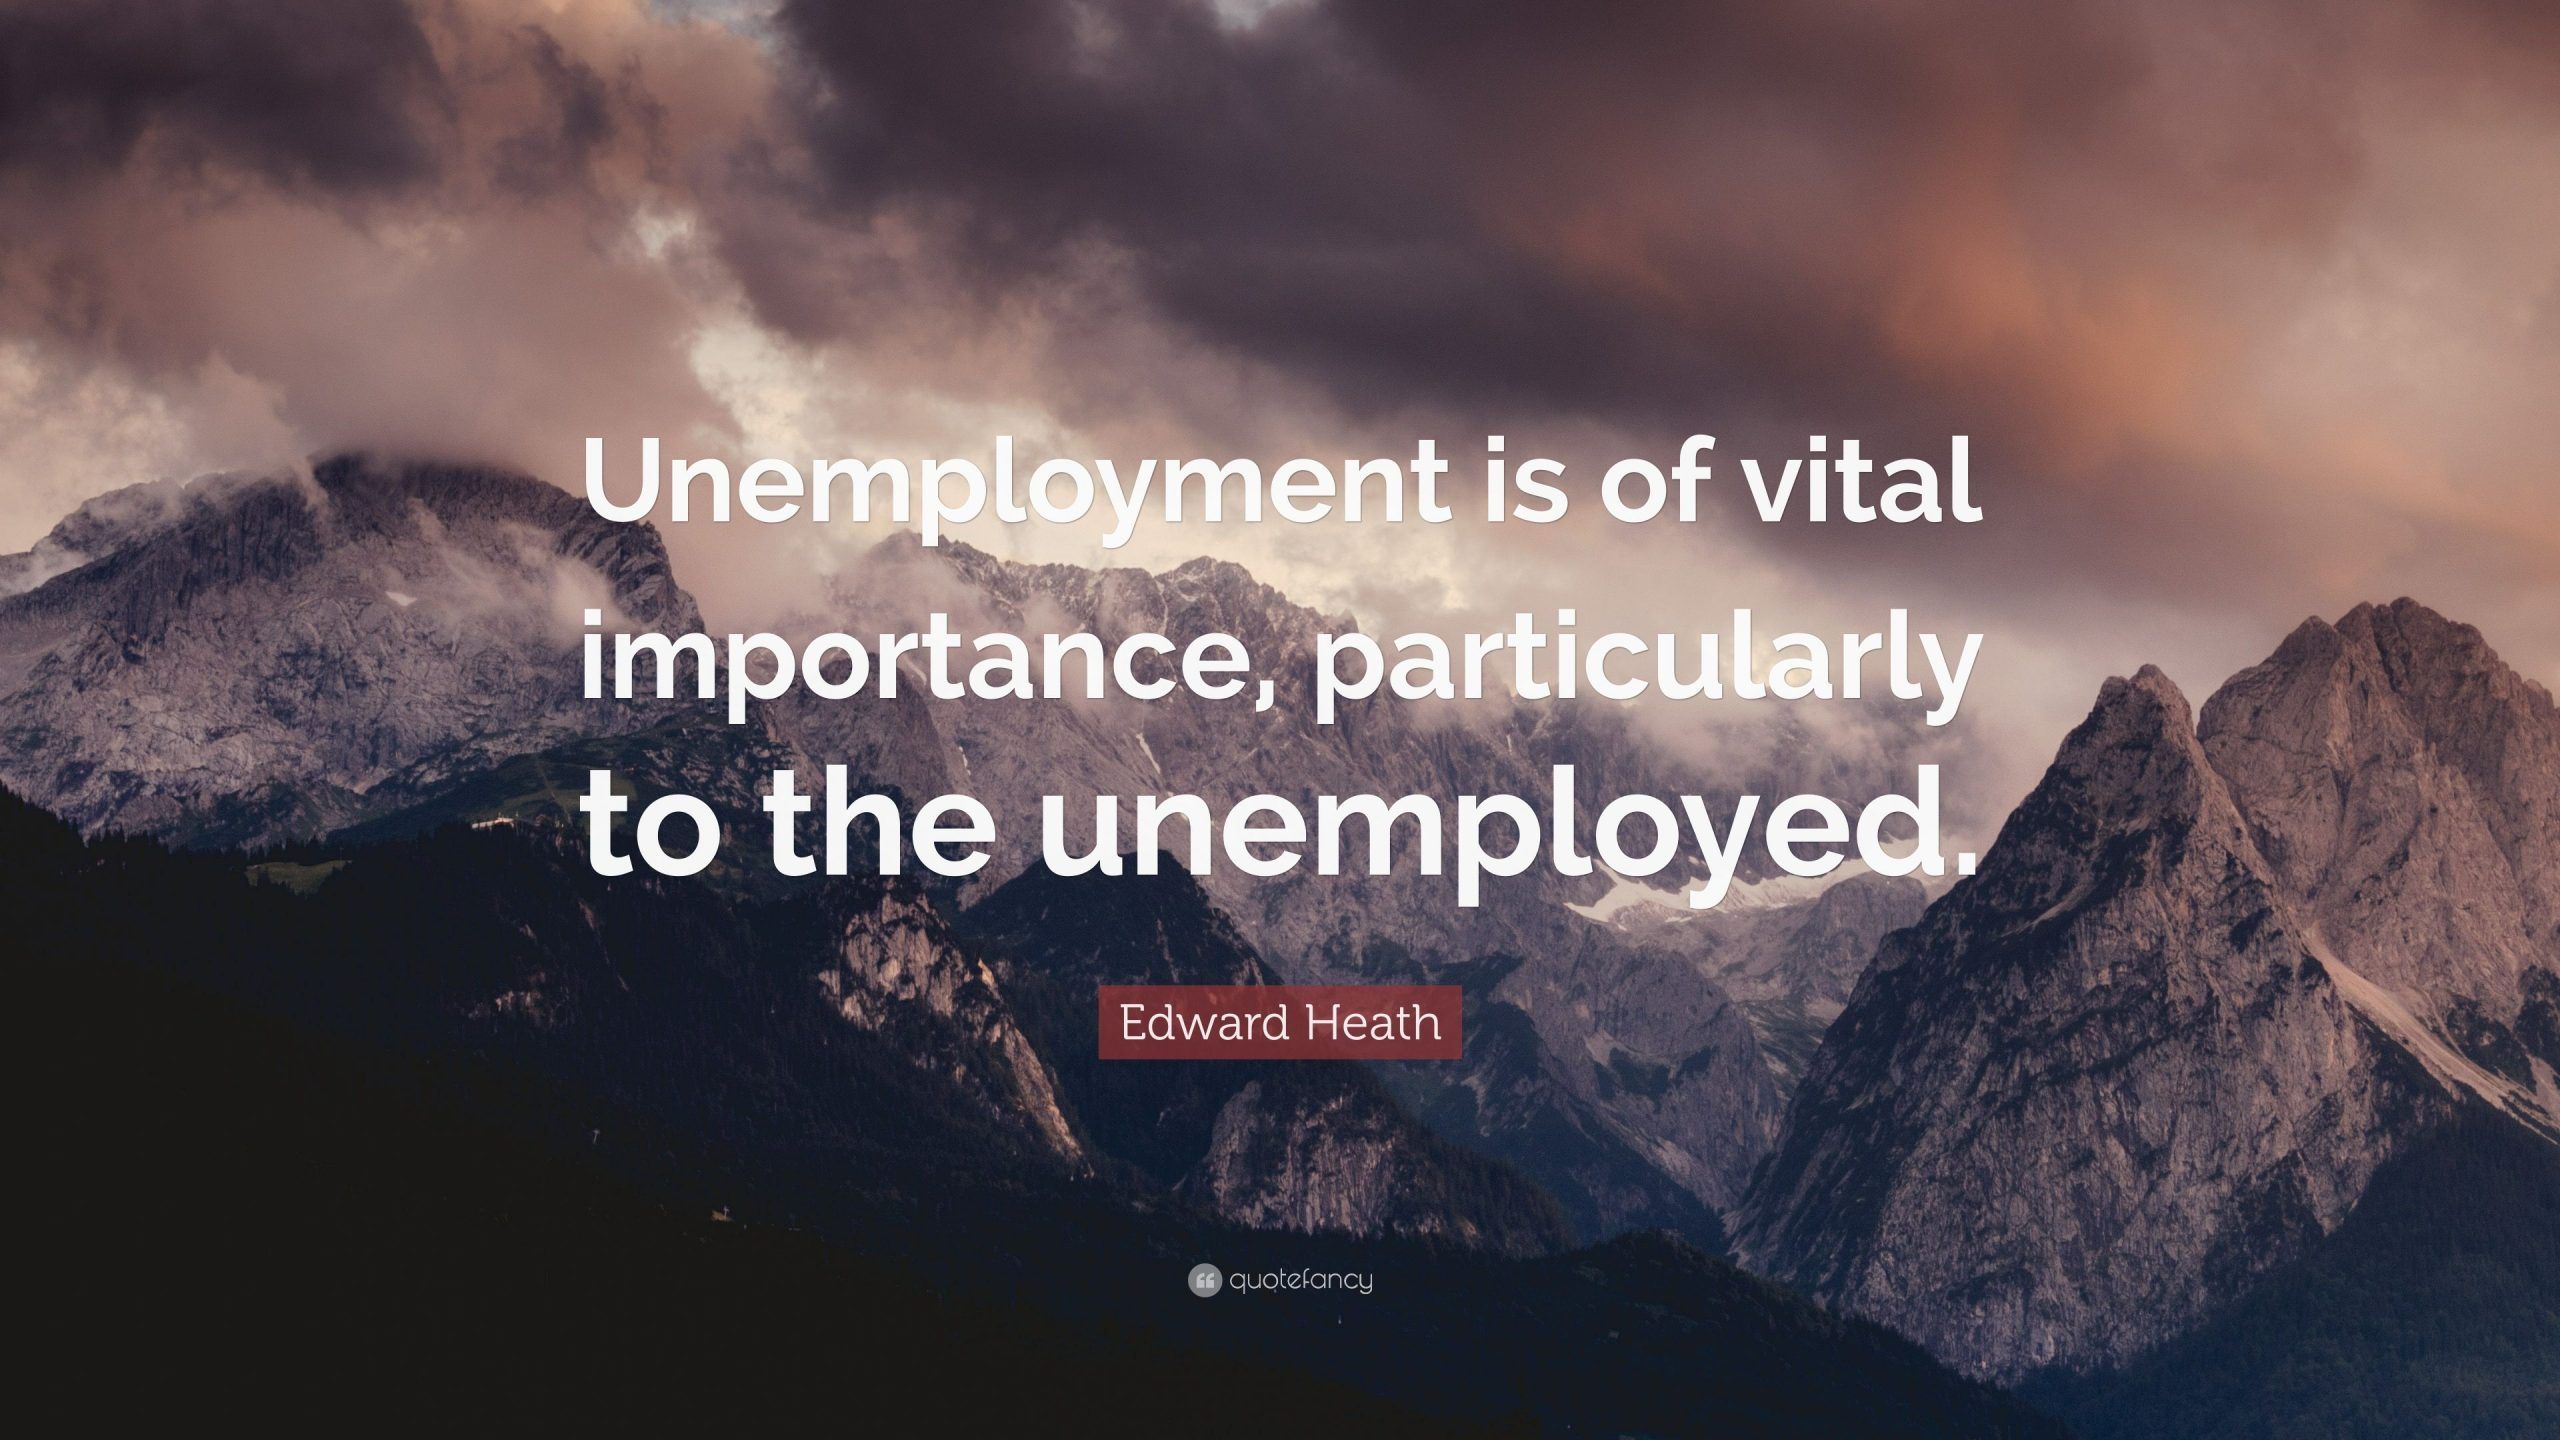 Quotes Unemployment Quote Quotes Image Ideas Calvin Coolidge E2809cthe Final Solution For Is Work Wallpaper 45 Unemployment Quote Image Ideas